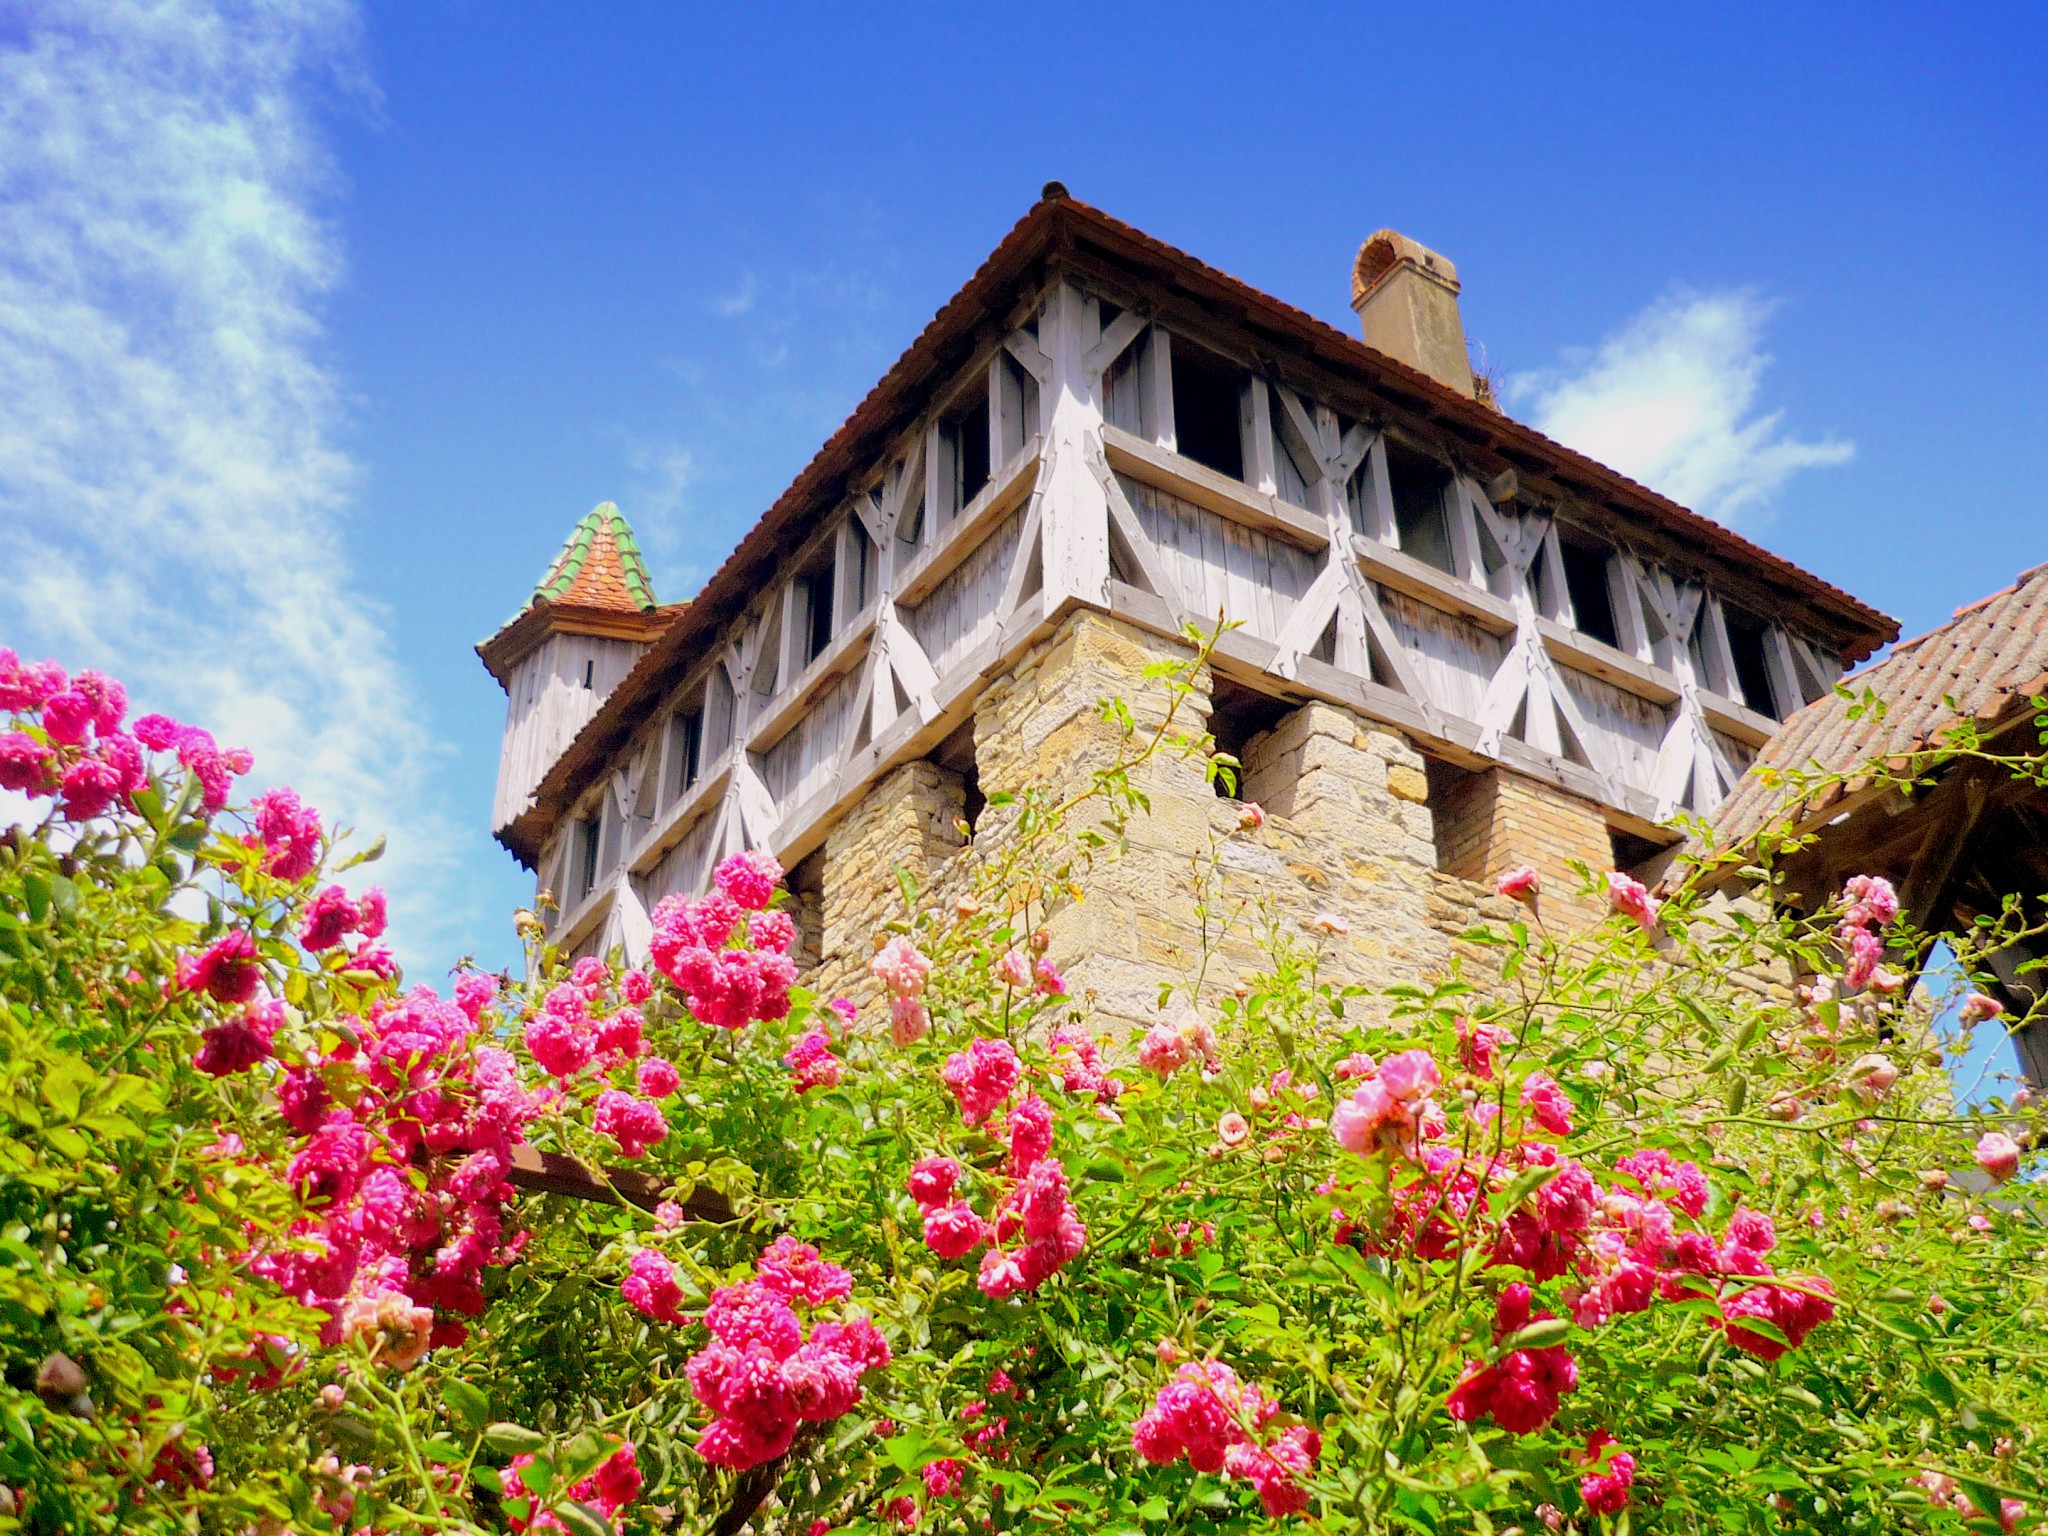 Keep at the Ecomusée d'Alsace © French Moments